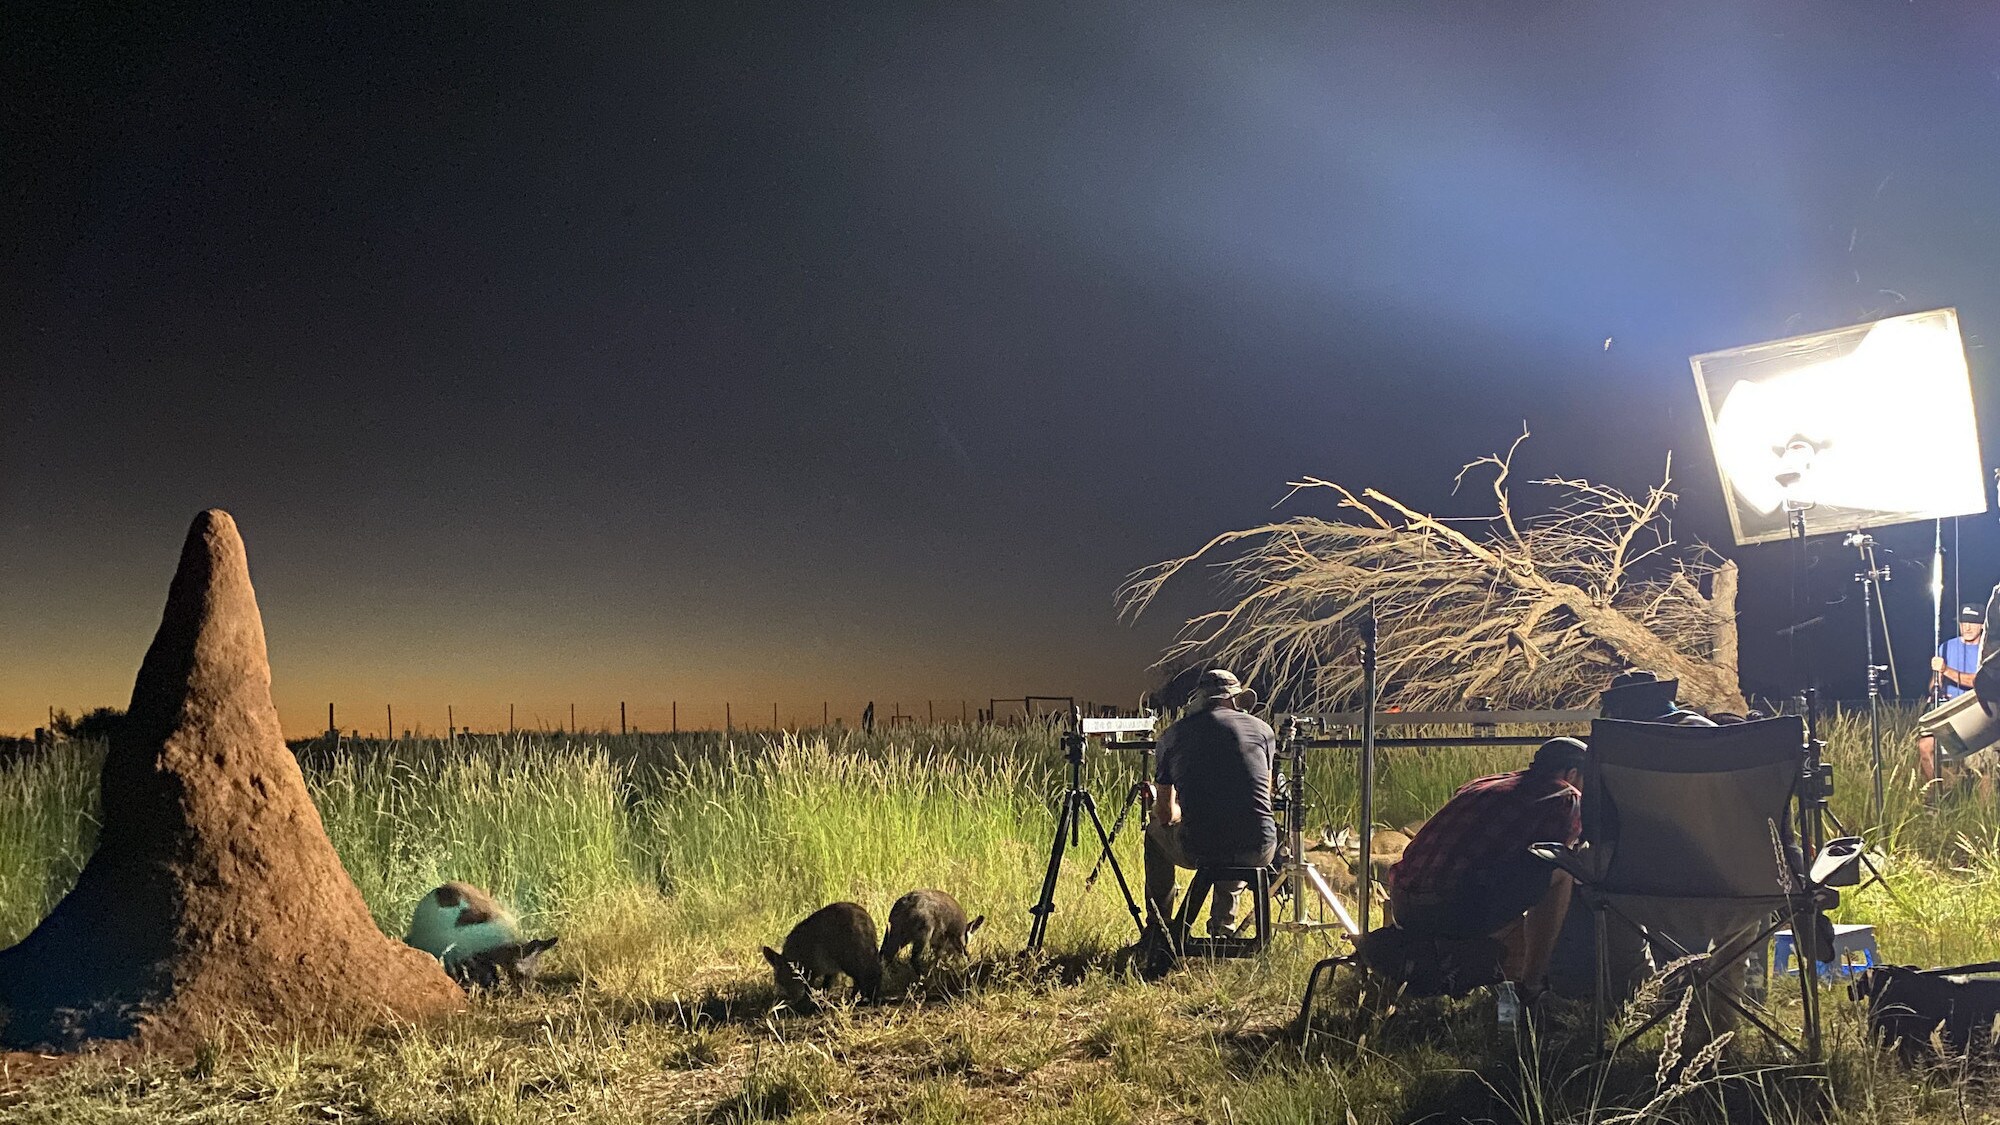 Director of Photography Chris Openshaw, Assistant Camera Niall Newport, Series Director Nat Sharman and lights tech Todd Mentz work together to film a termite mound at sunset with a few bat-eared foxes seen nearby at the Felidae Centre near Kimberley, South Africa for the "Land of Giants" episode of "A Real Bug's Life." (National Geographic/Amy Gilchrist)